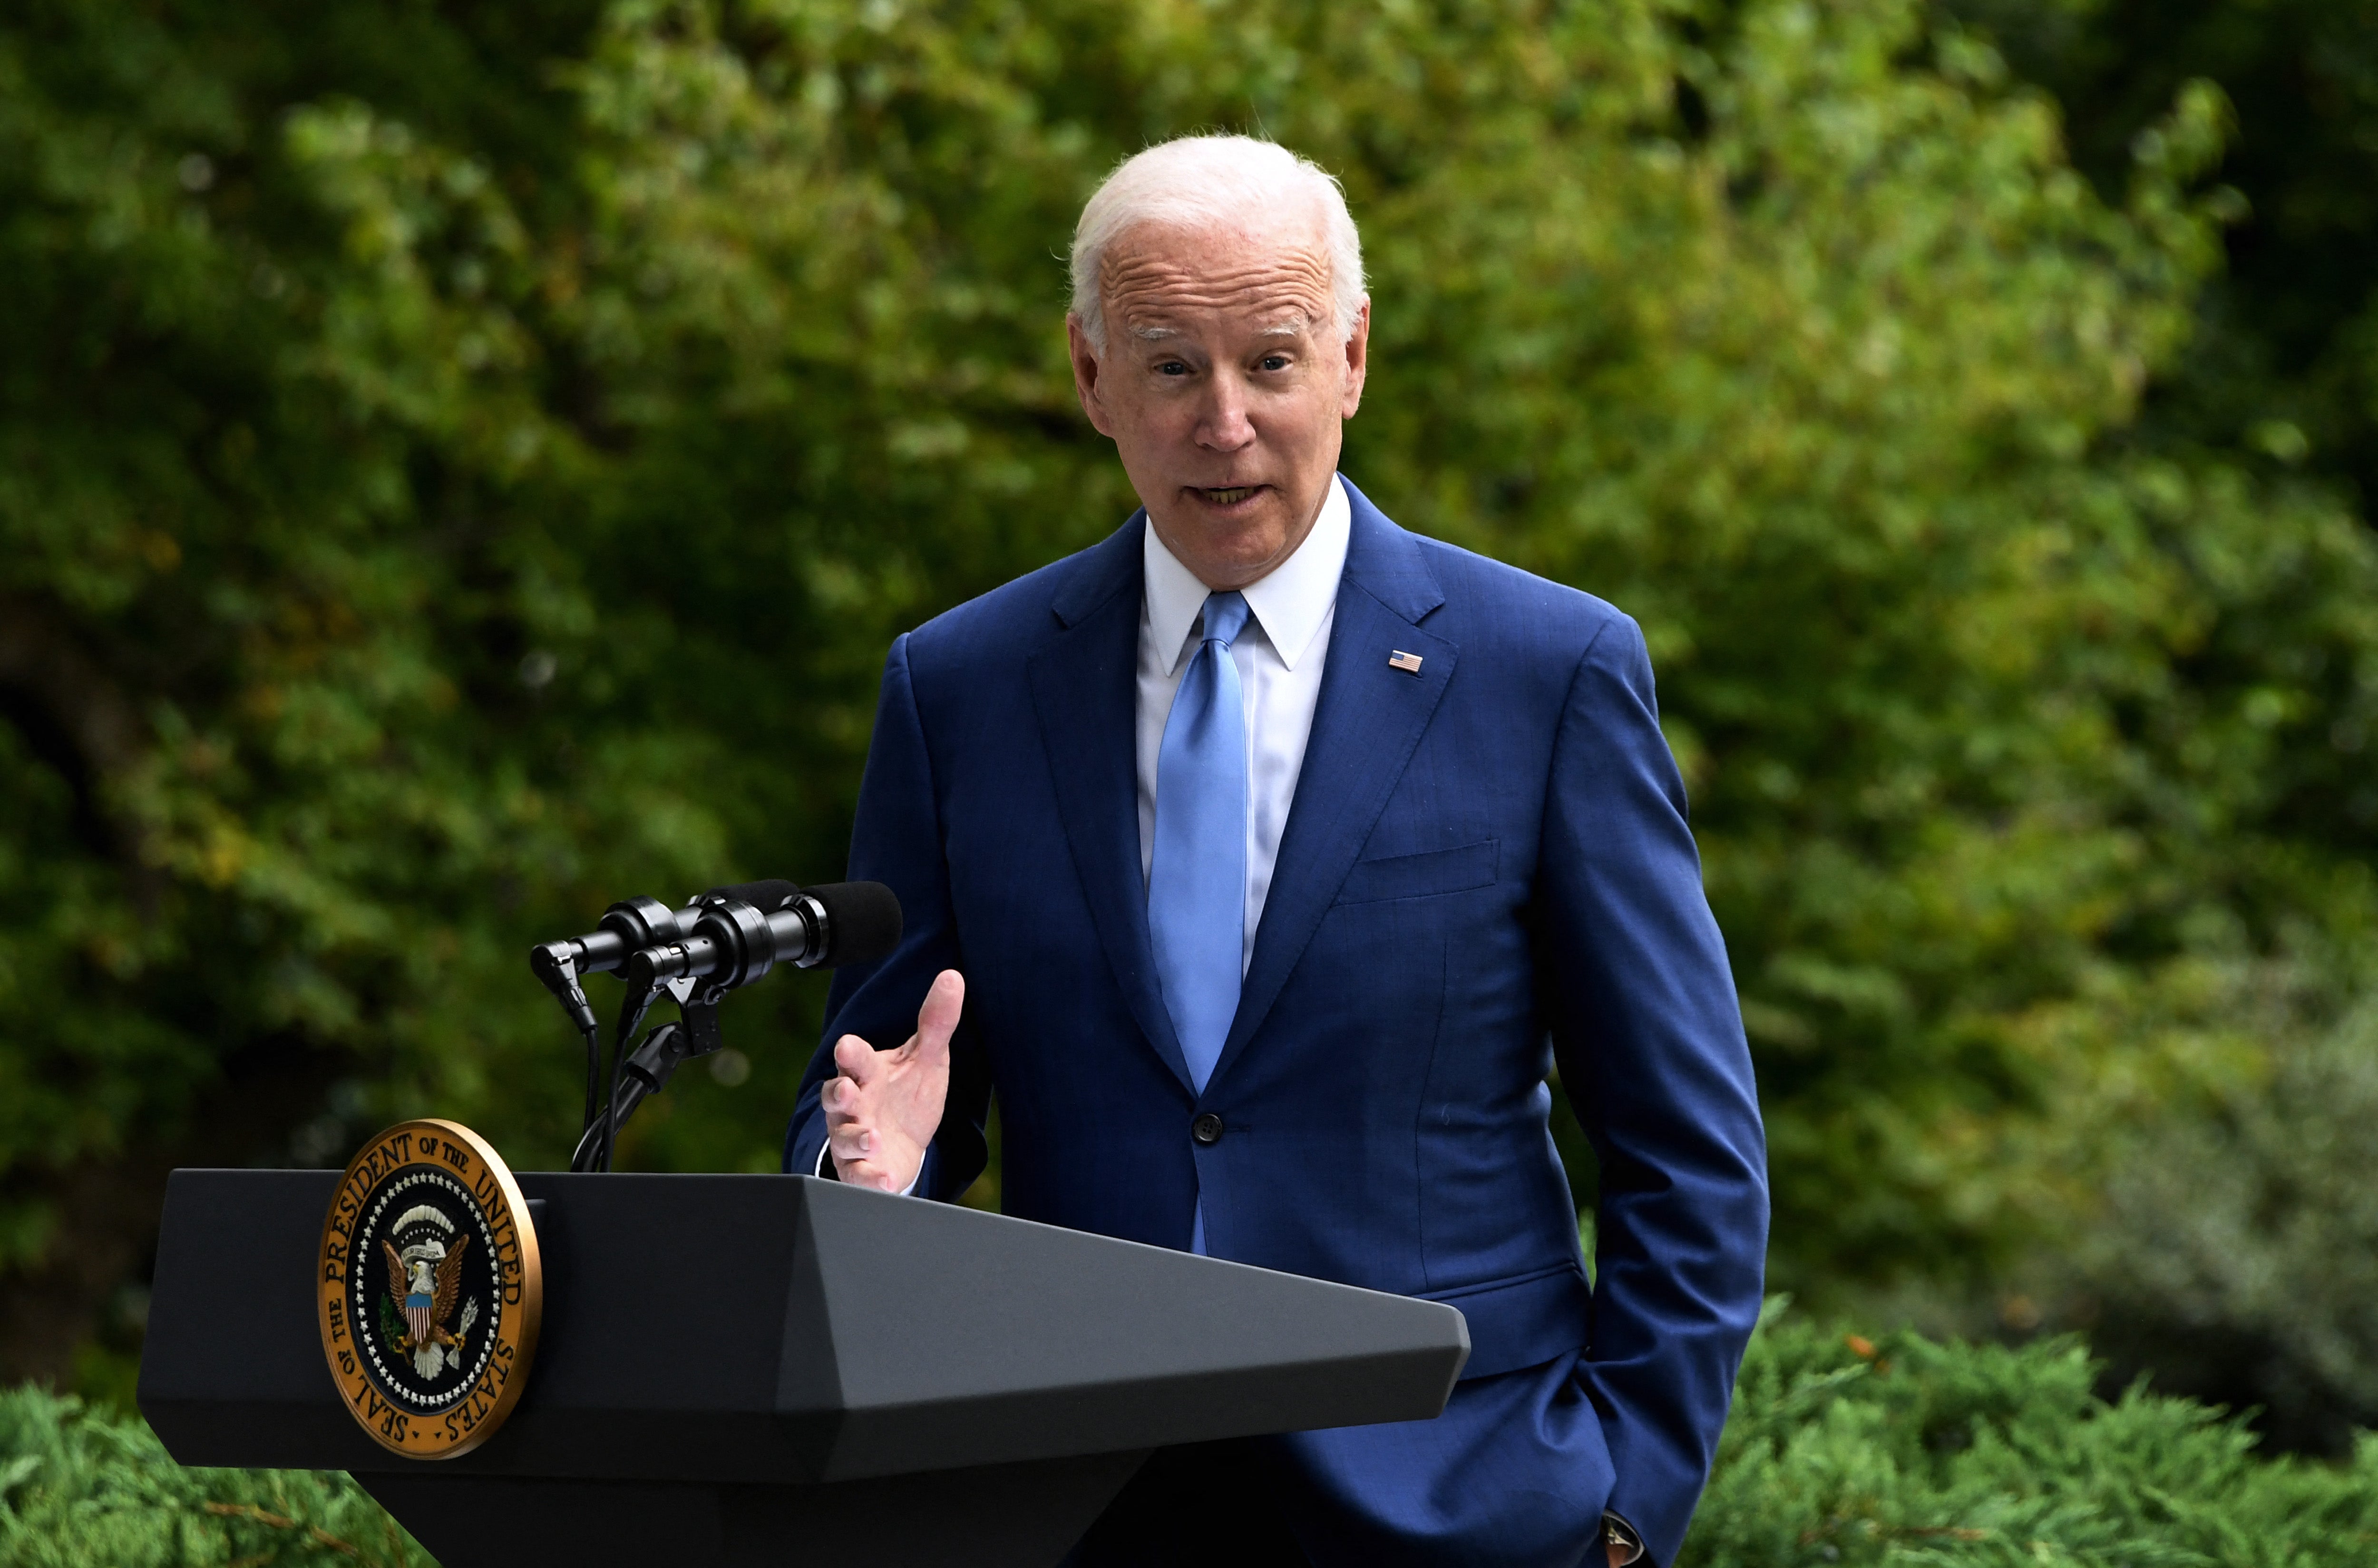 ‘The Biden administration shows no interest in restoring the US leadership role over trade’